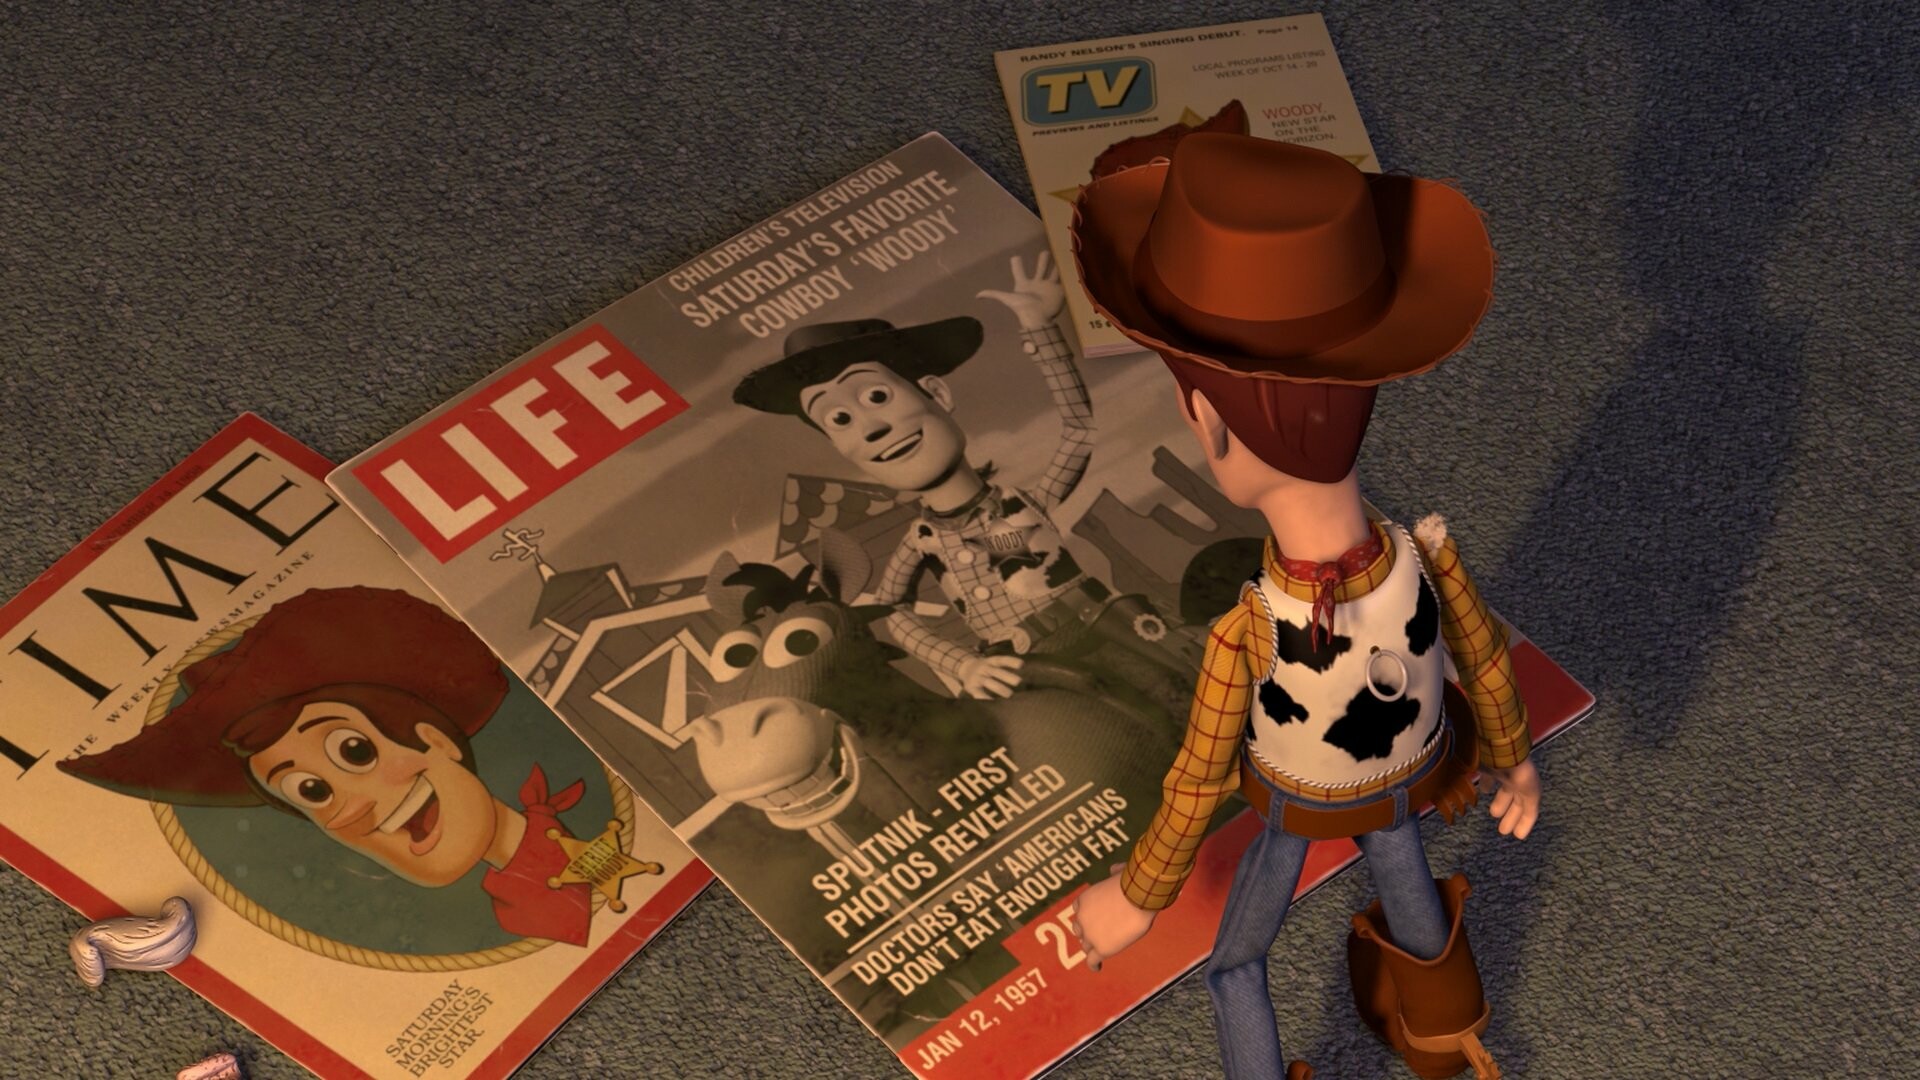 Toy Story (Animation), Toy Story 2 high-definition wallpaper, Classic image, 1920x1080 Full HD Desktop